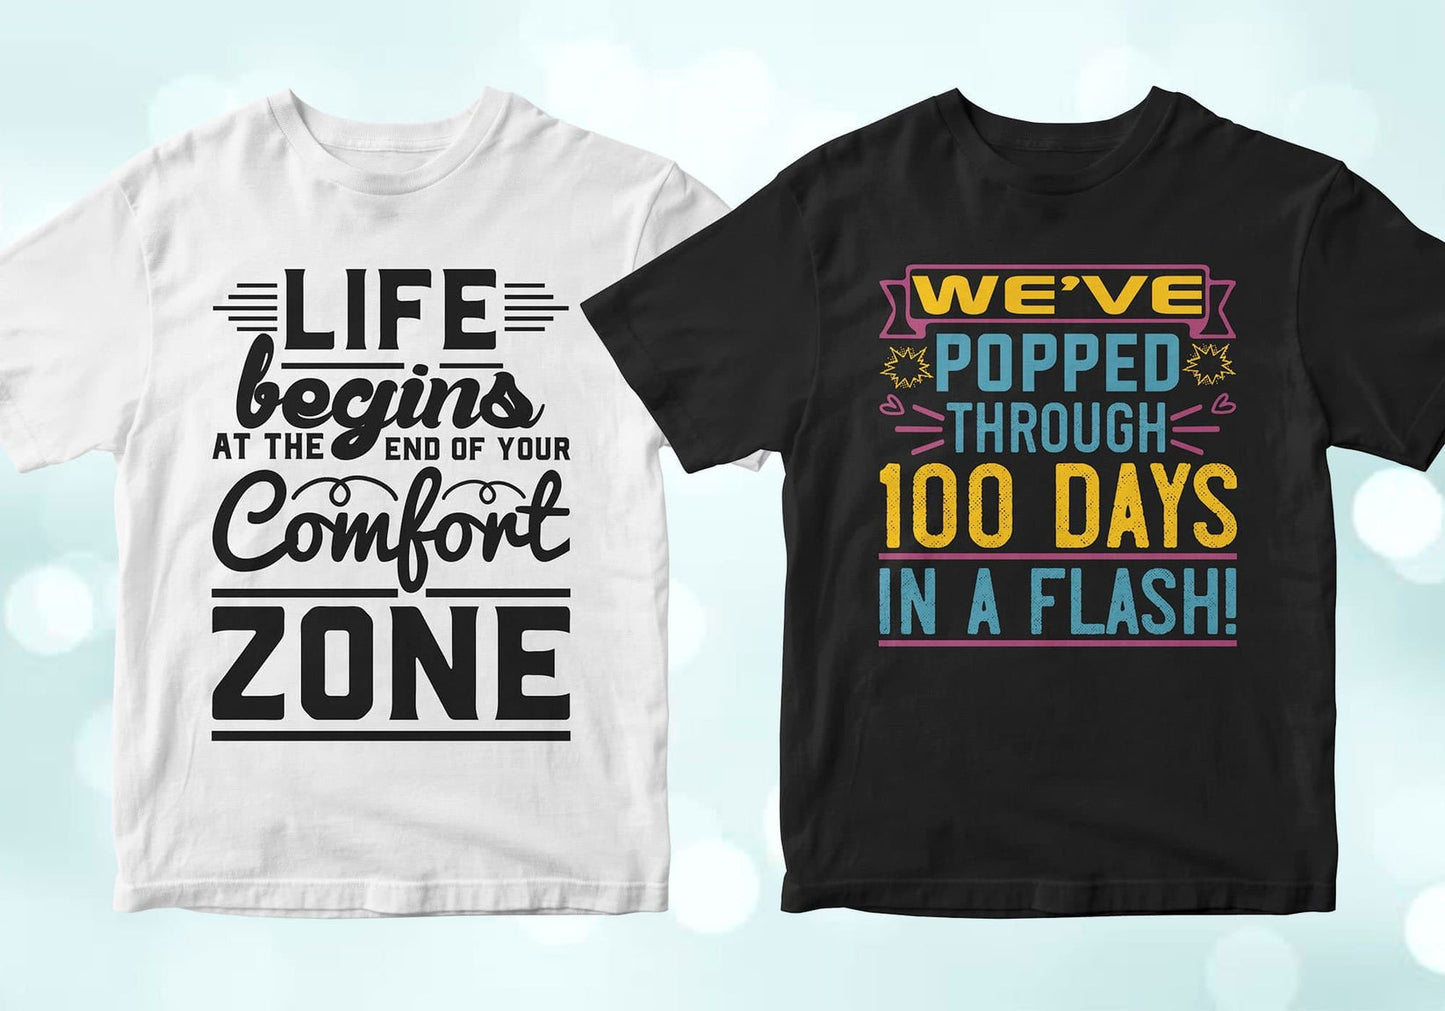 Life begins at the end of your comfort zone, we've popped through 100 days in a flash